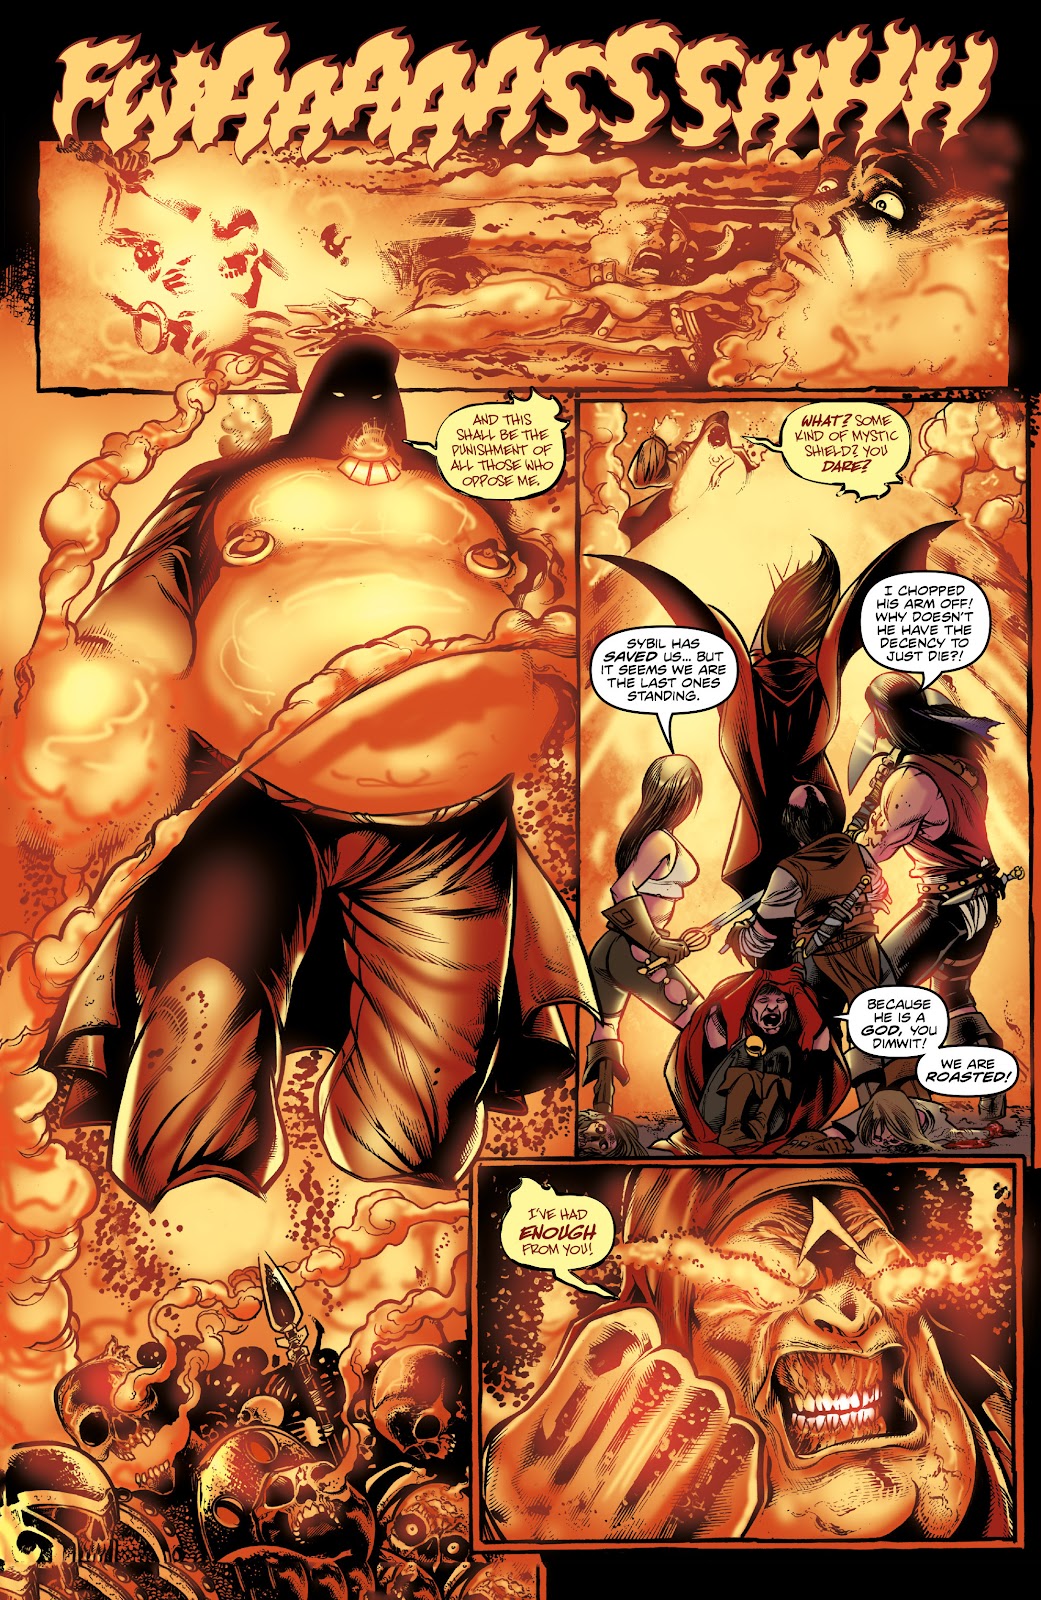 Rogues!: The Burning Heart issue 3 - Page 17